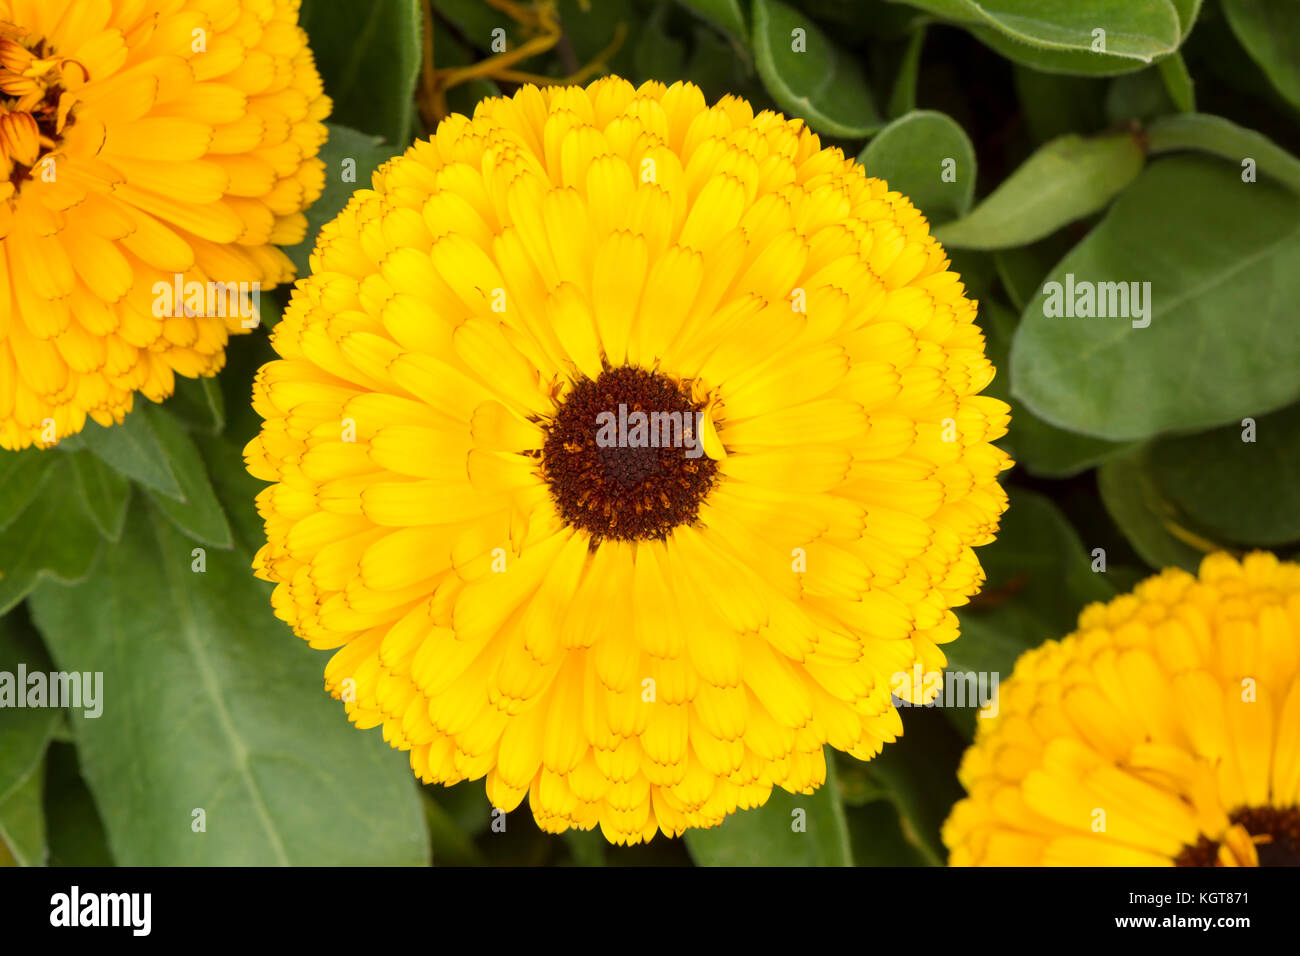 Group of yellow calendula officinalis (pot marigold), double cultivar with dark heart growing in it's natural garden and foliage setting as it's back  Stock Photo